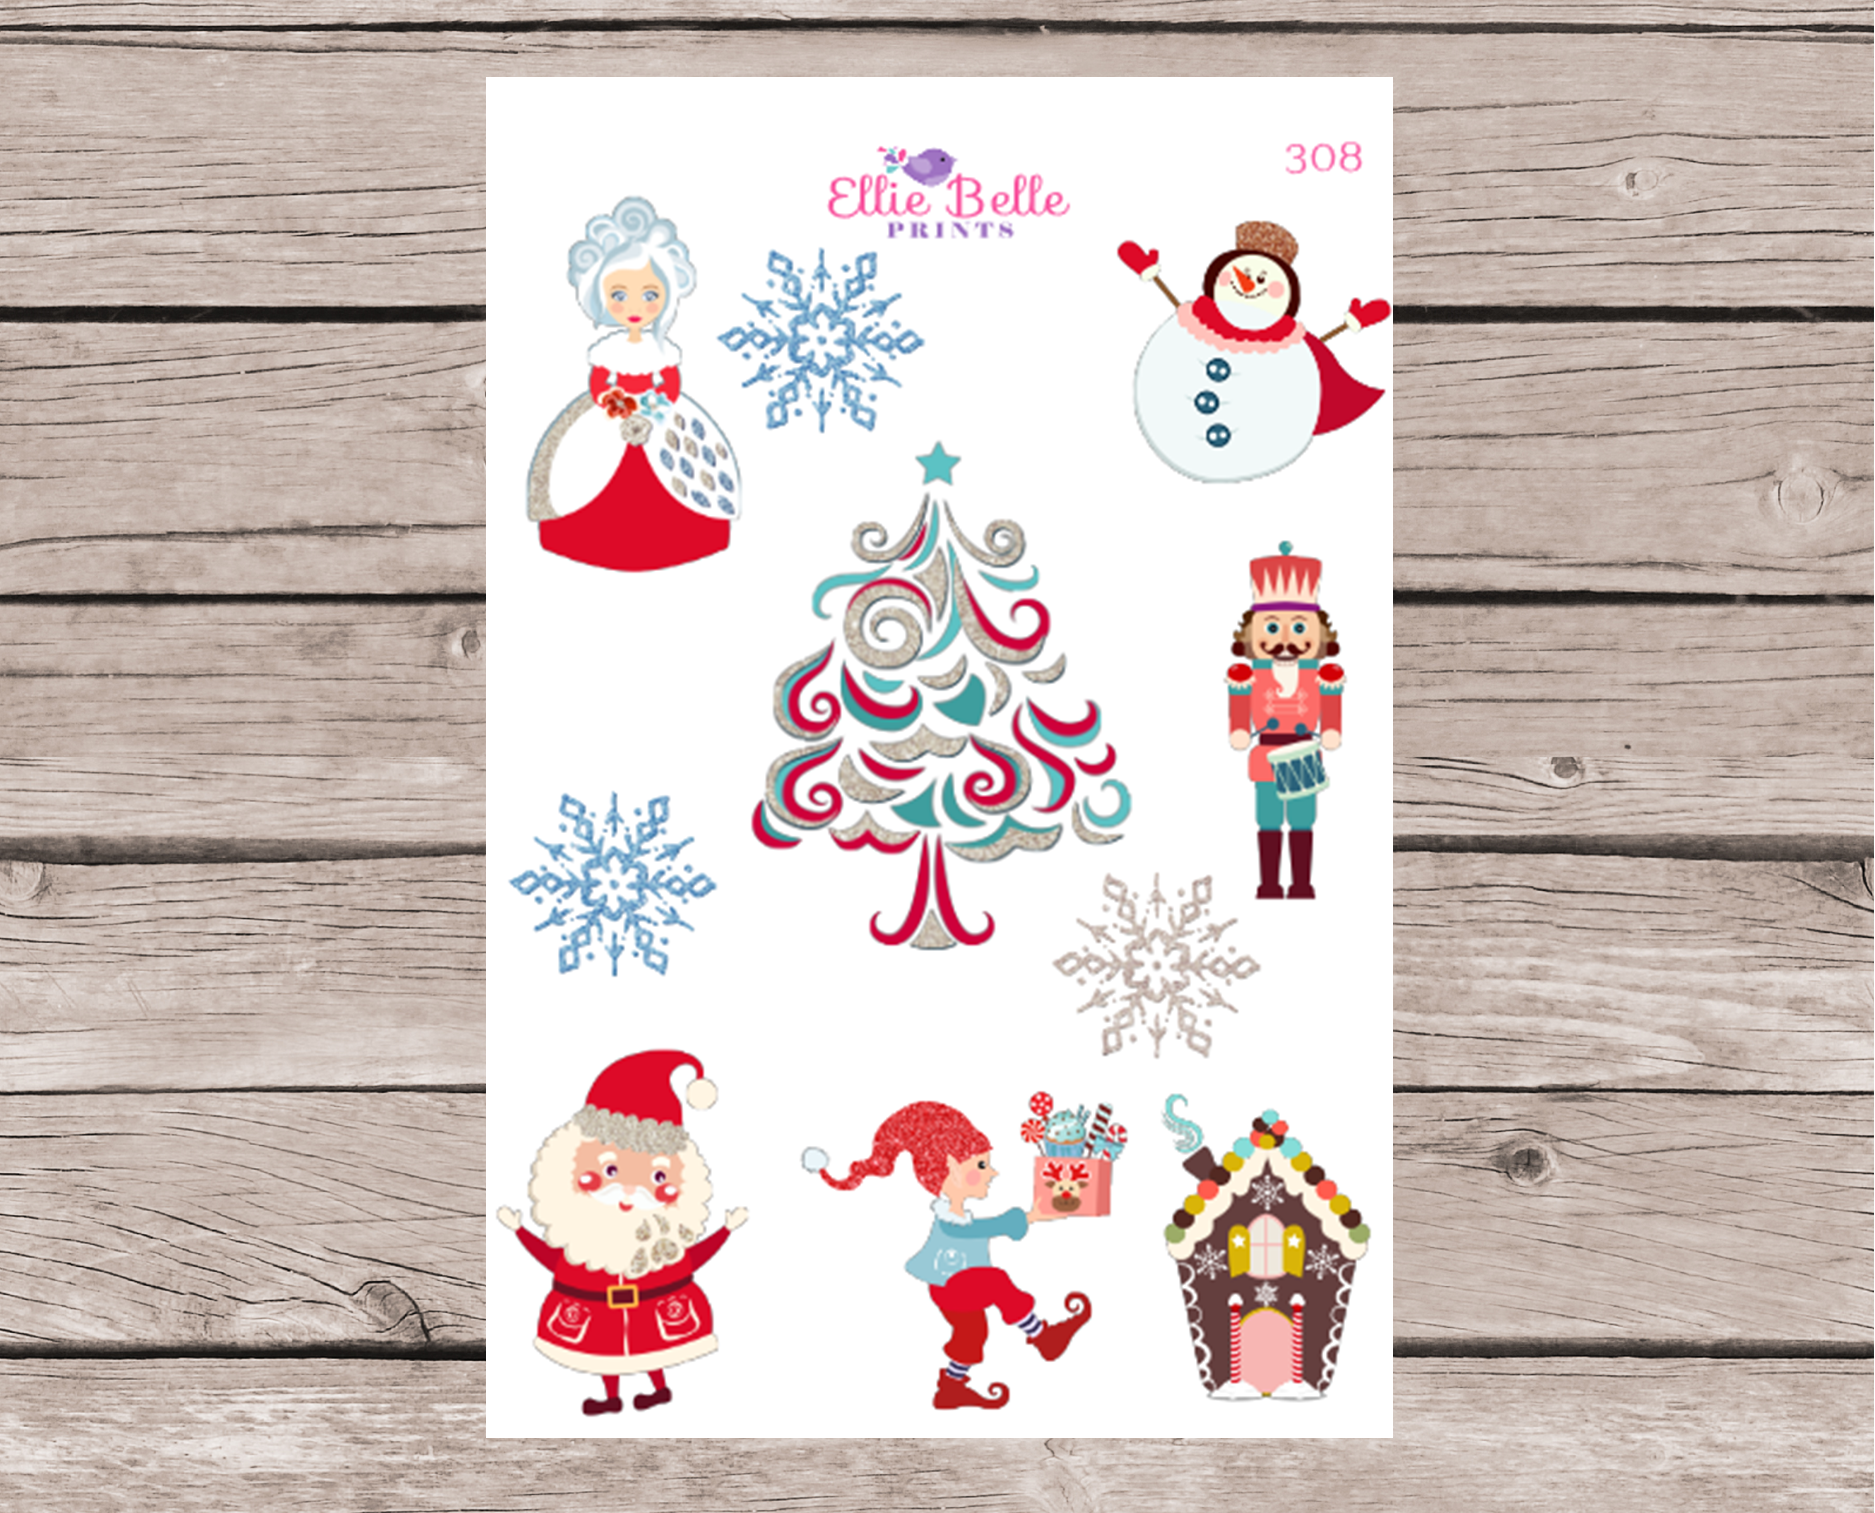 Christmas Time Stickers